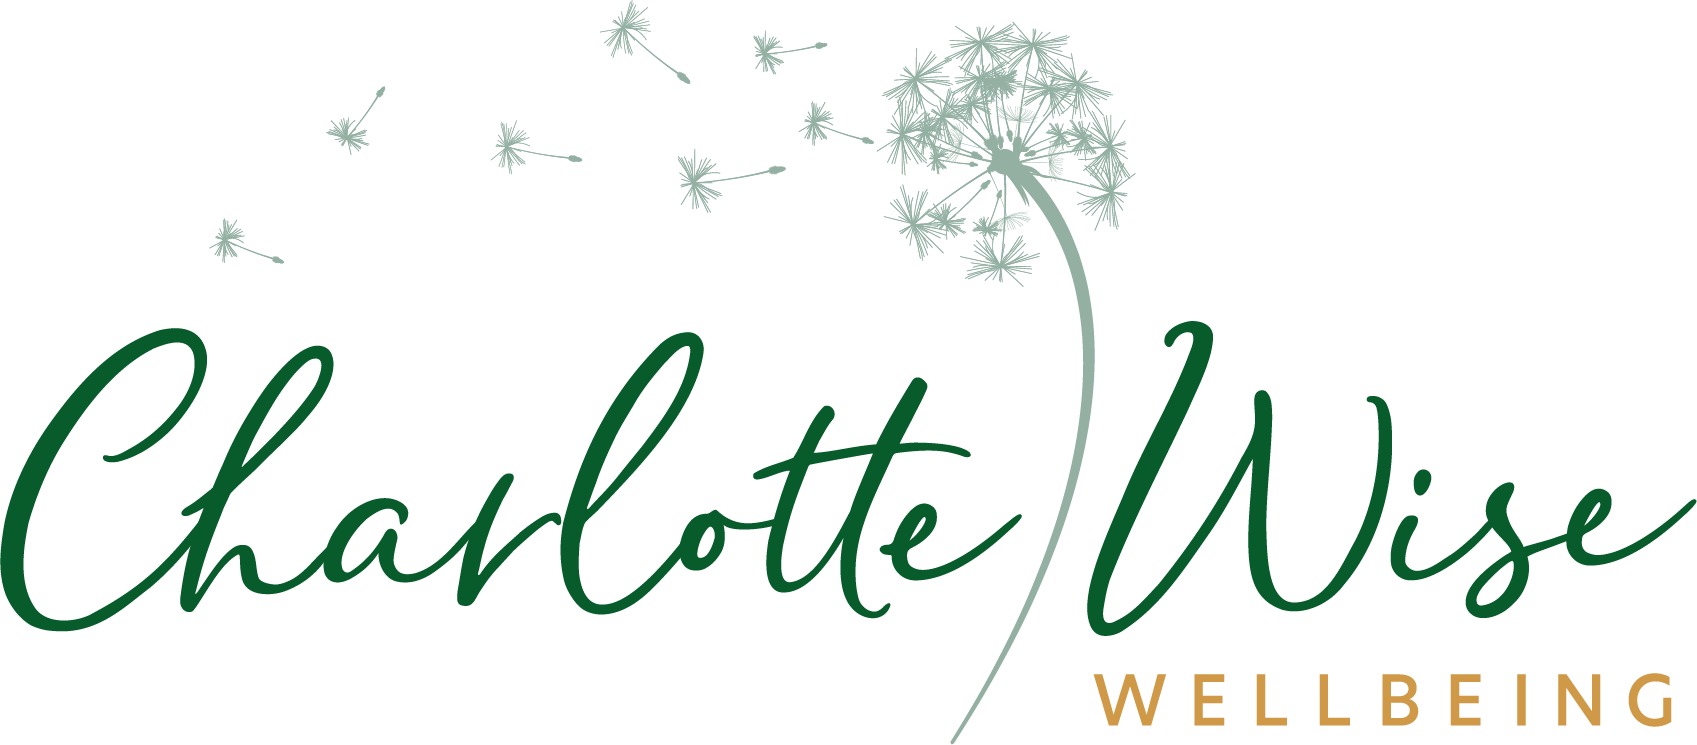 Charlotte Wise Wellbeing